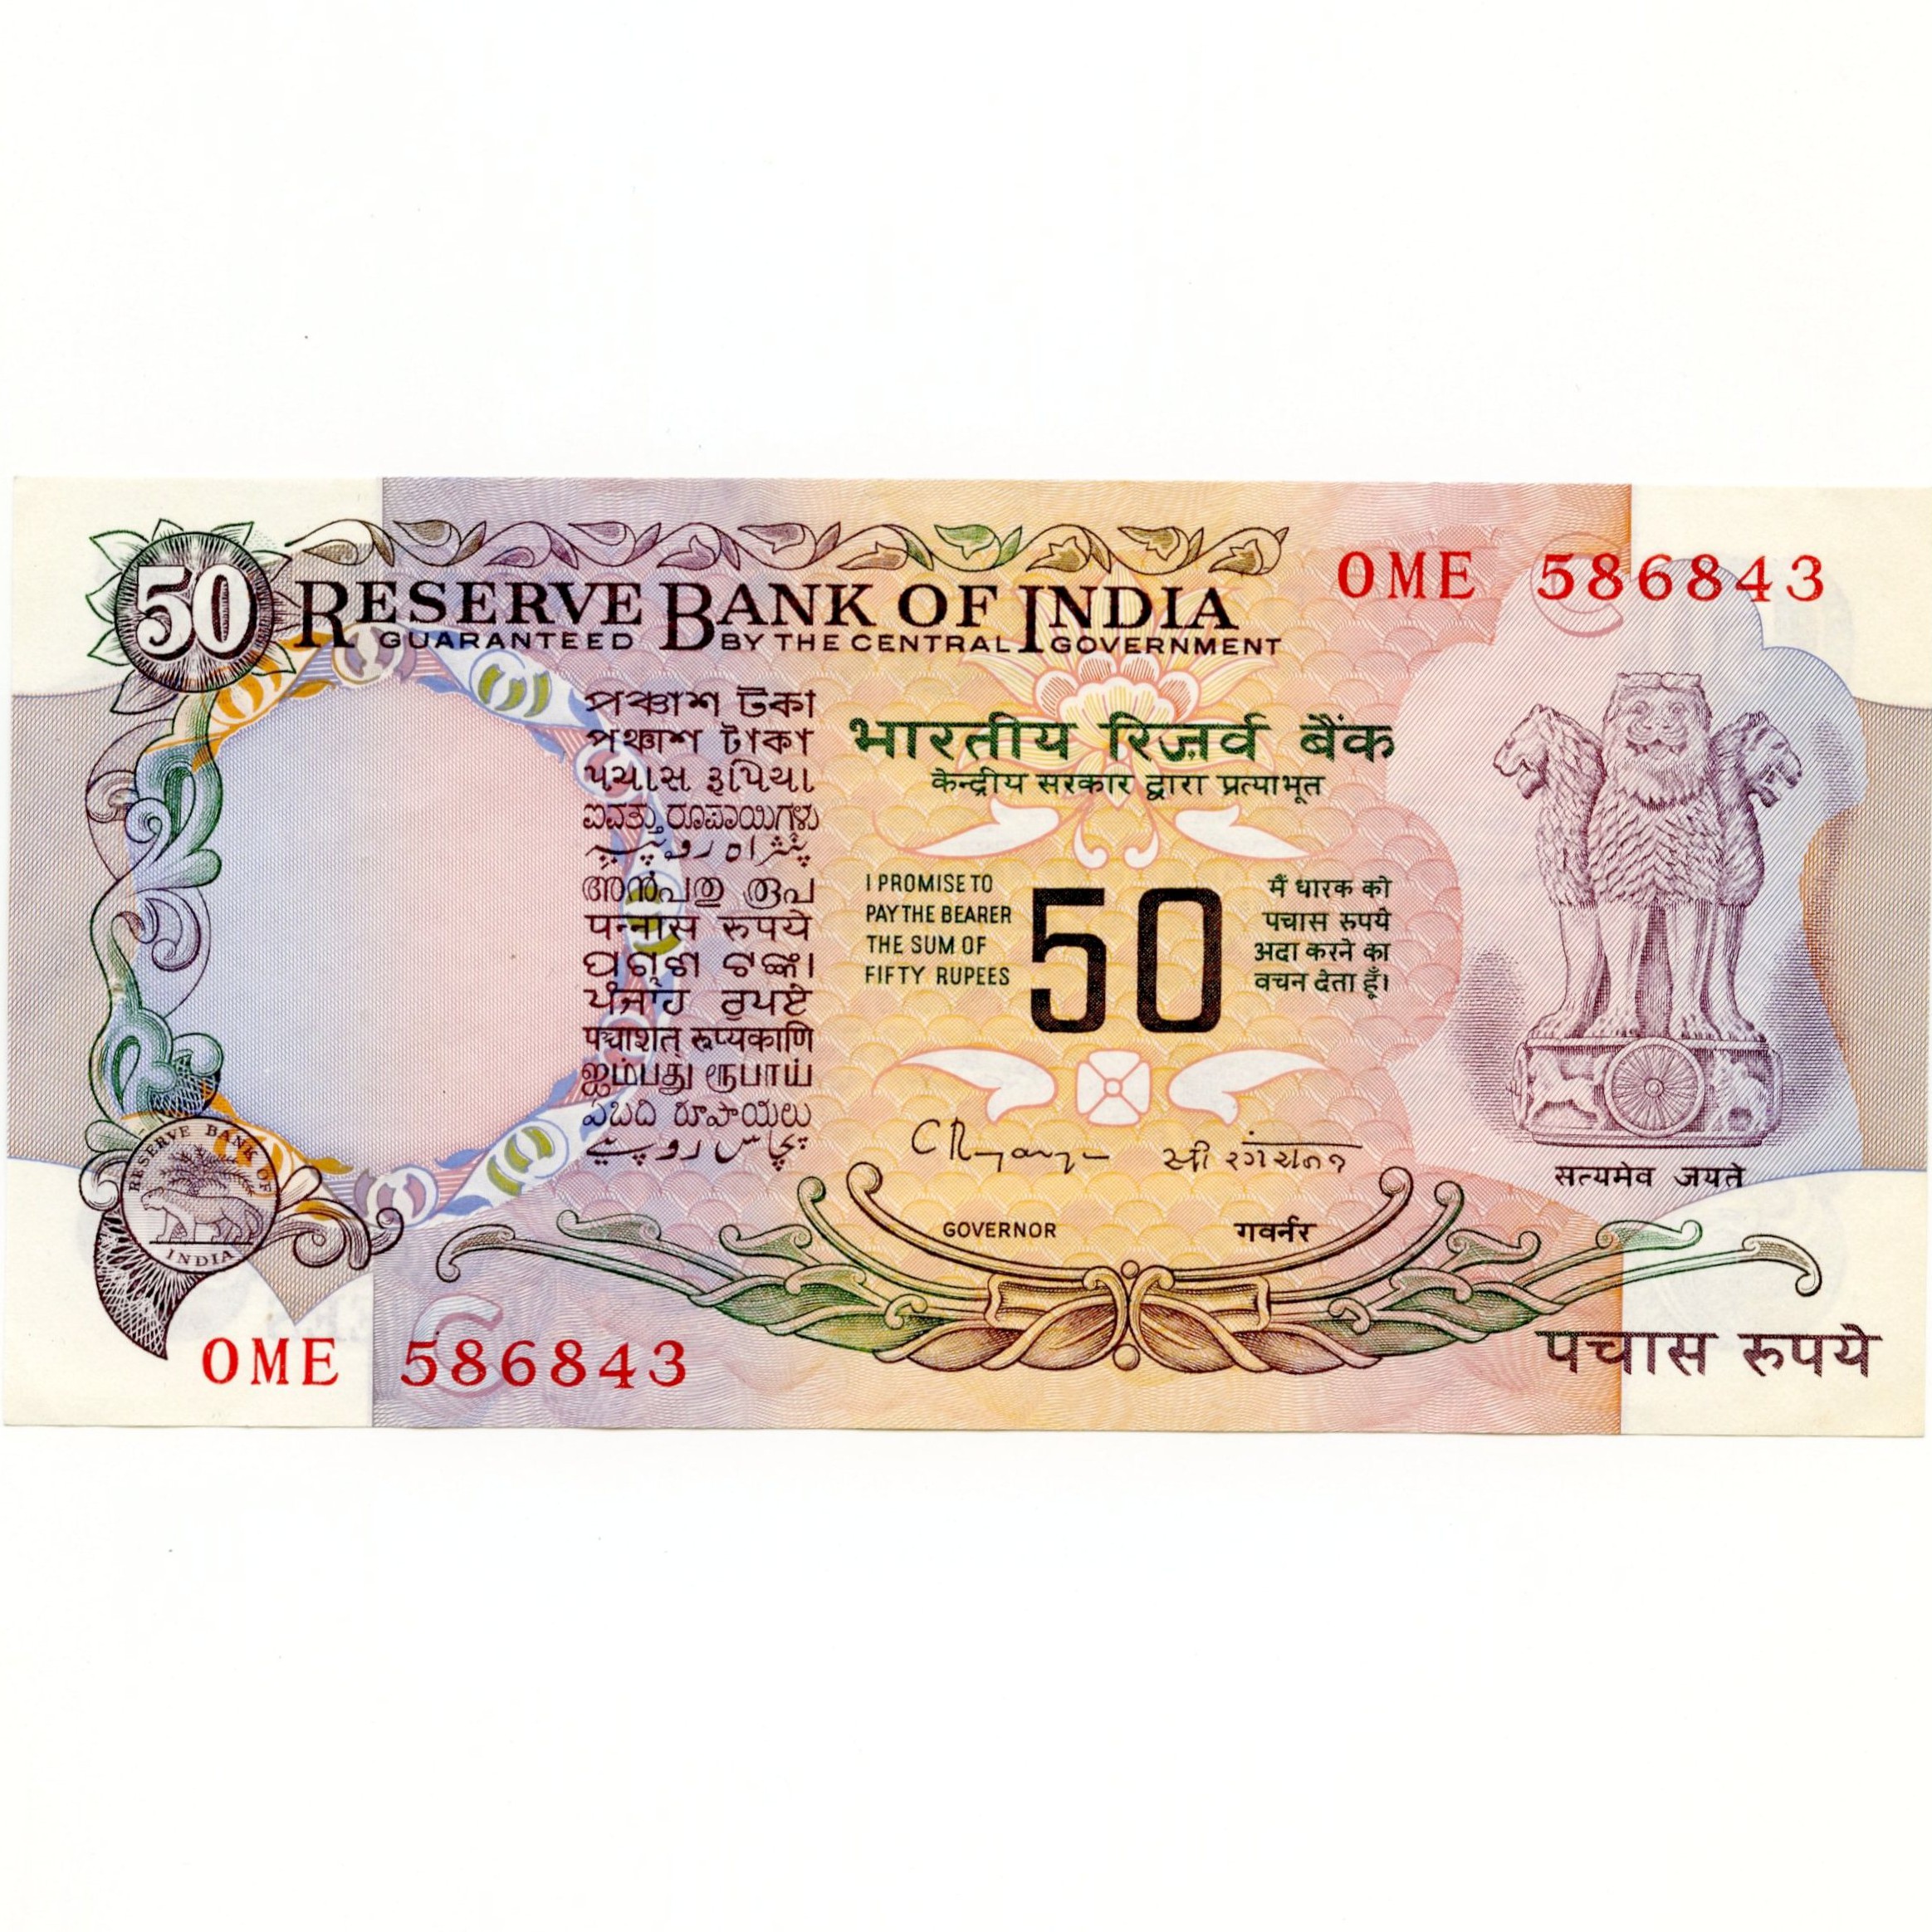 Inde - 50 Rupees - OME 586843 avers